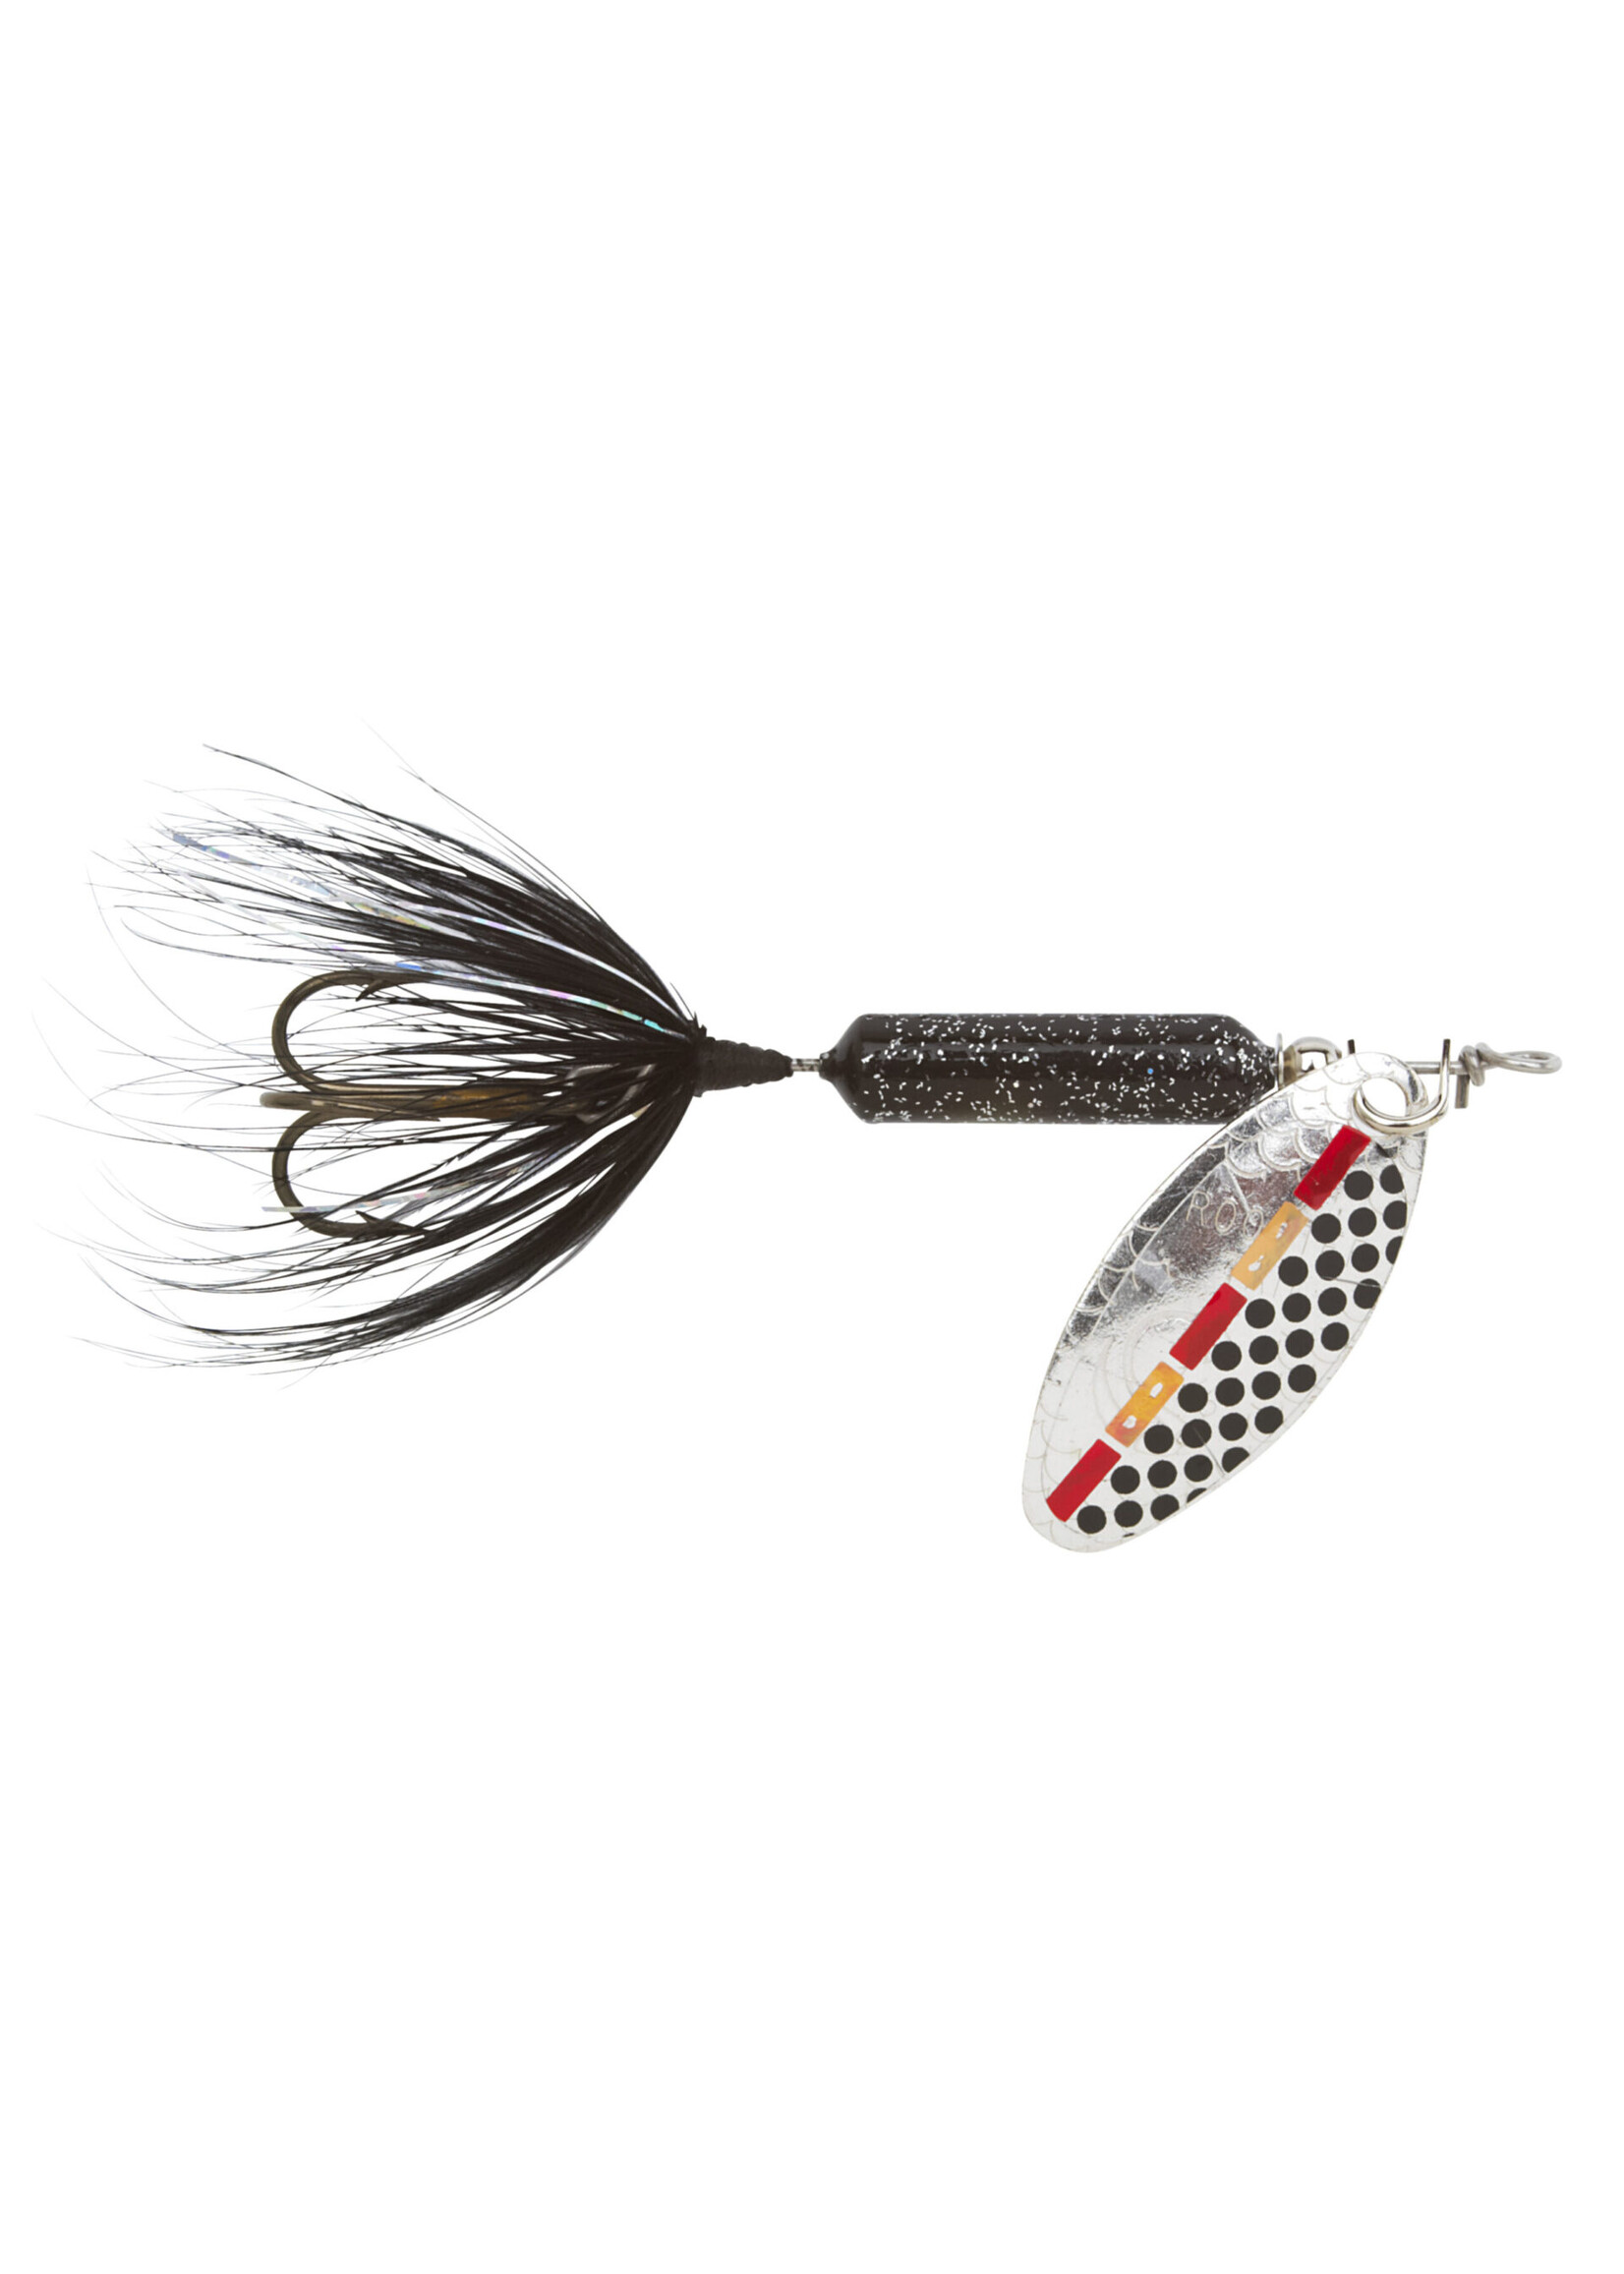 Rooster Tails 206-MF Mayfly 1/16 oz Fishing Spinnerbait Freshwater